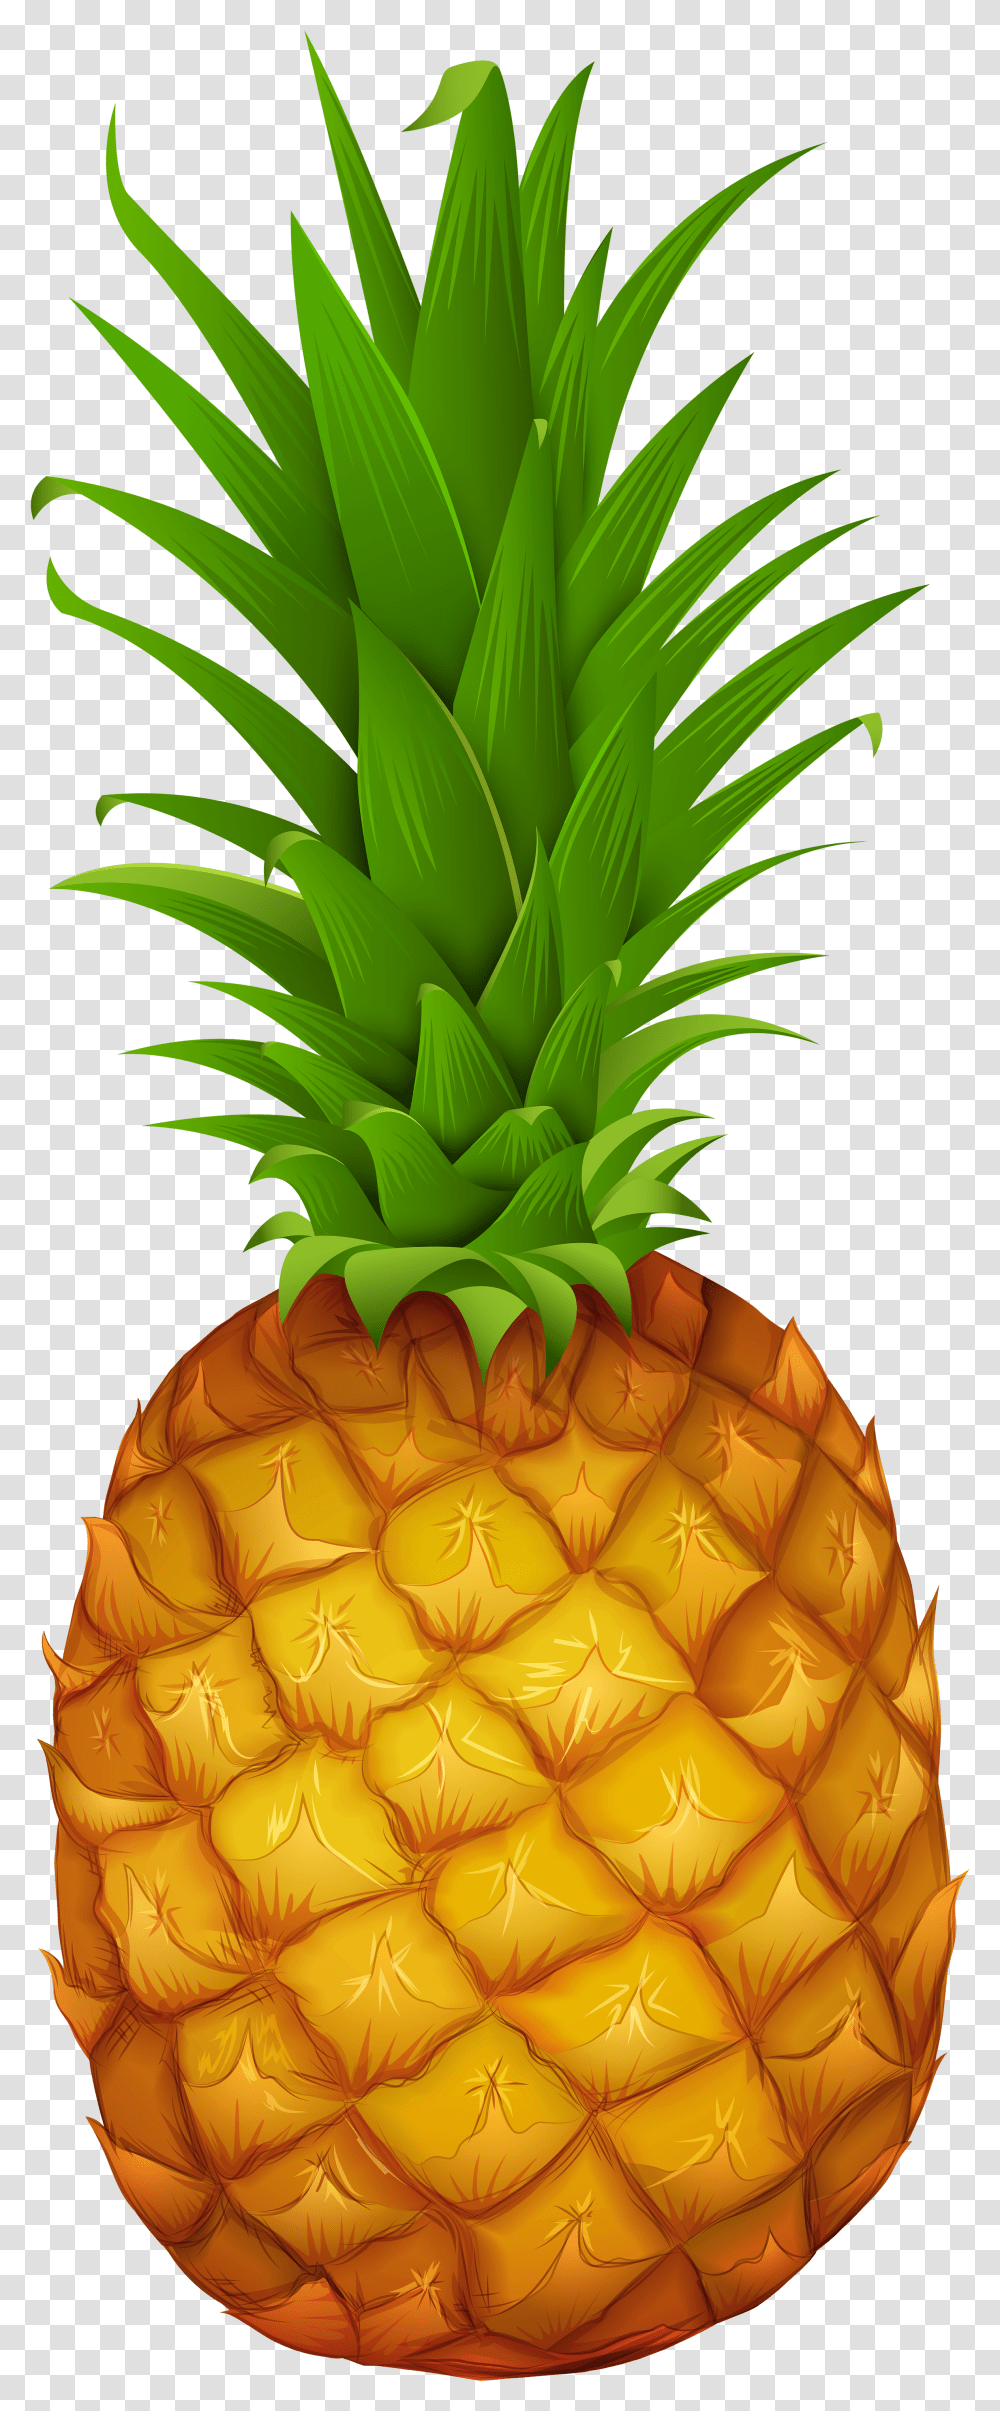 Clip Art Pineapple Gallery Yopriceville High Clip Art Pineapple Transparent Png